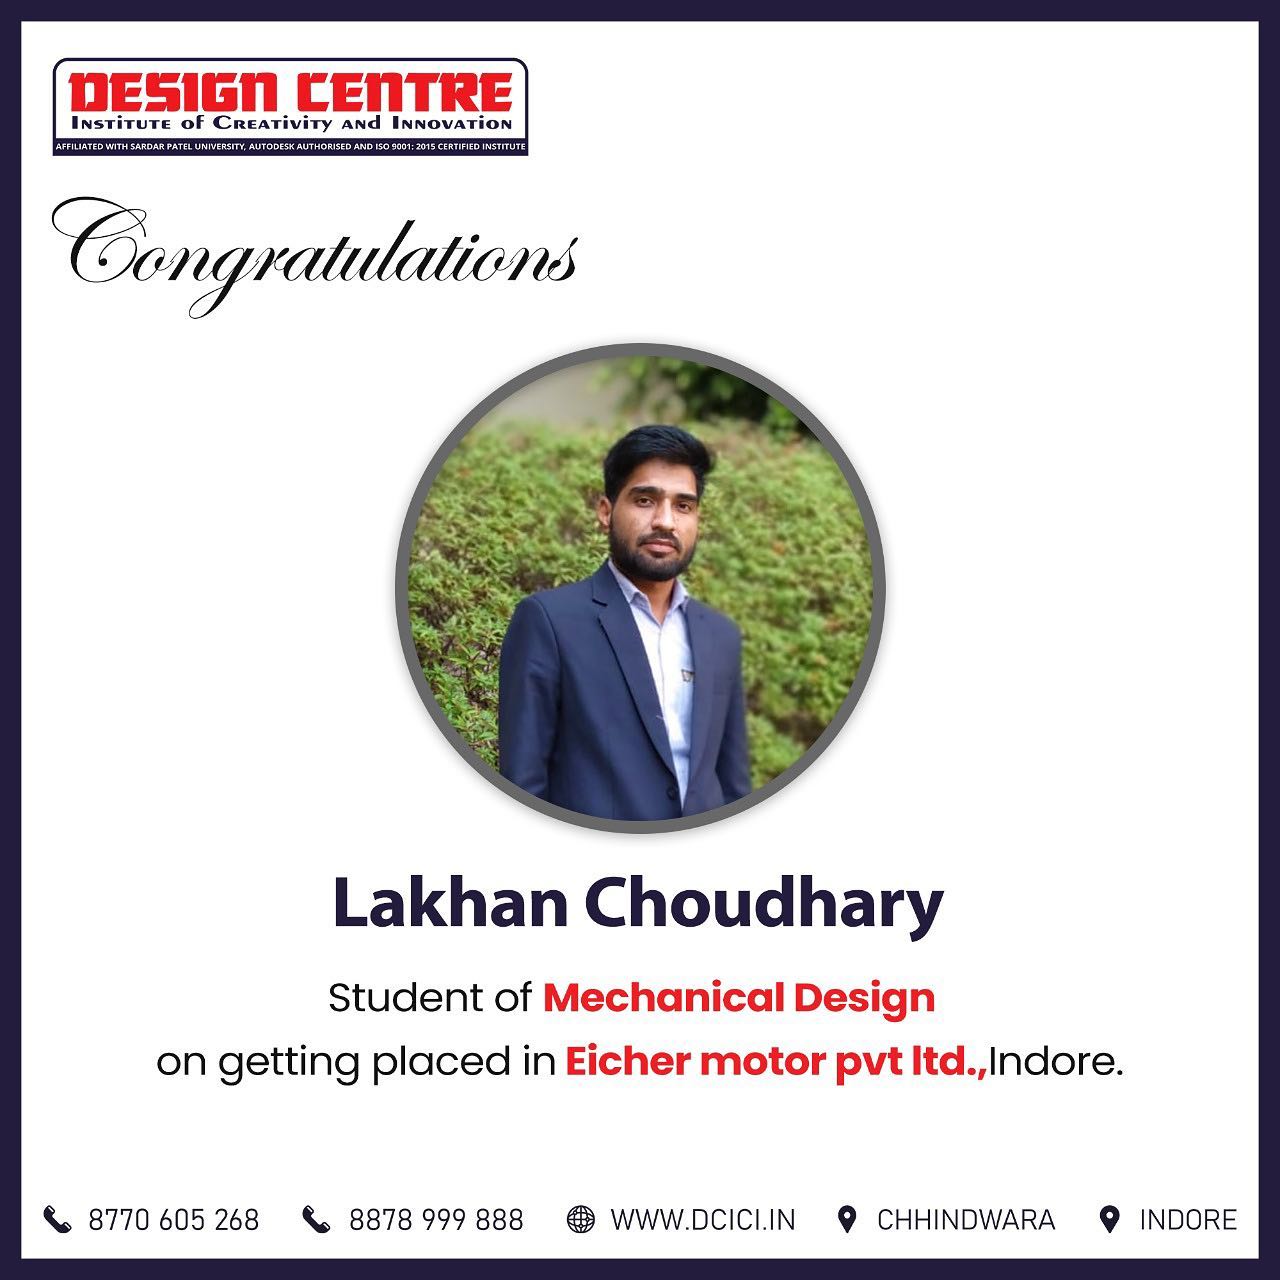 Lakhan-Choudhary-student-of-Mechanical-Design-at-Design-Centre -got-placement-in-Eicher-Company